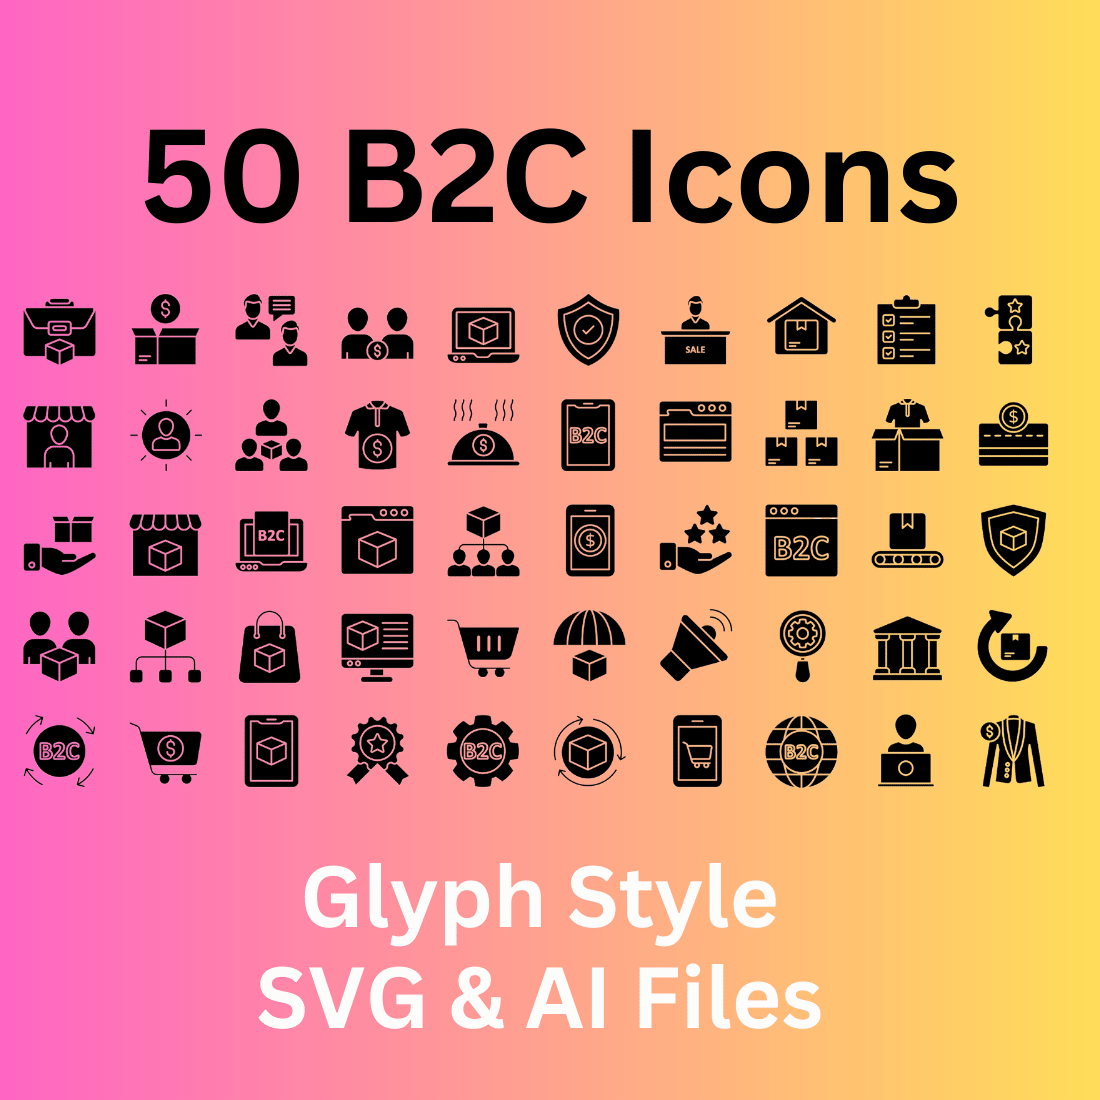 B2C Icon Set 50 Glyph Icons - SVG And AI Files cover image.